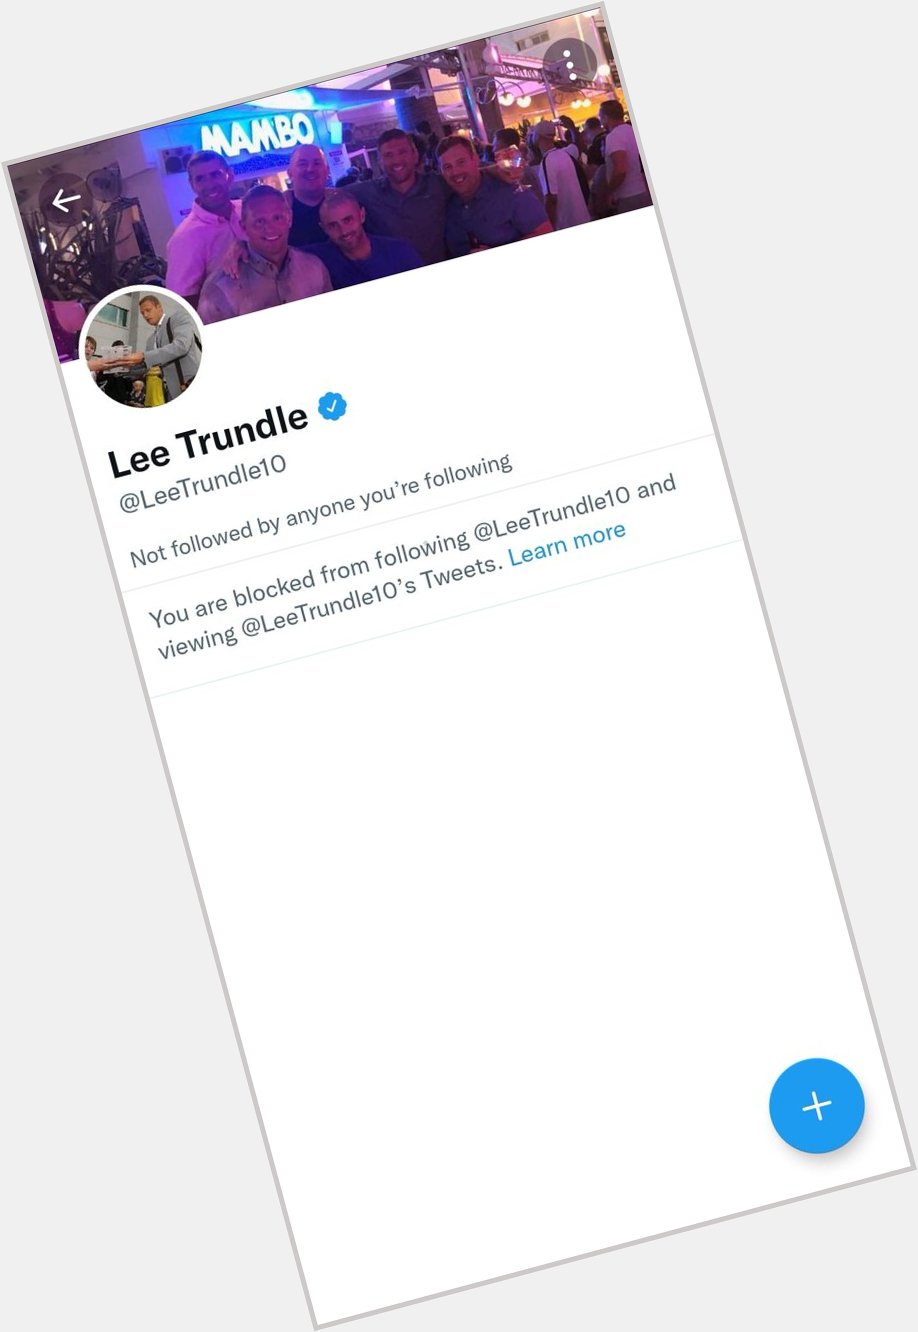 I would wish Lee Trundle a happy birthday, but he blocked me 10 years ago. 